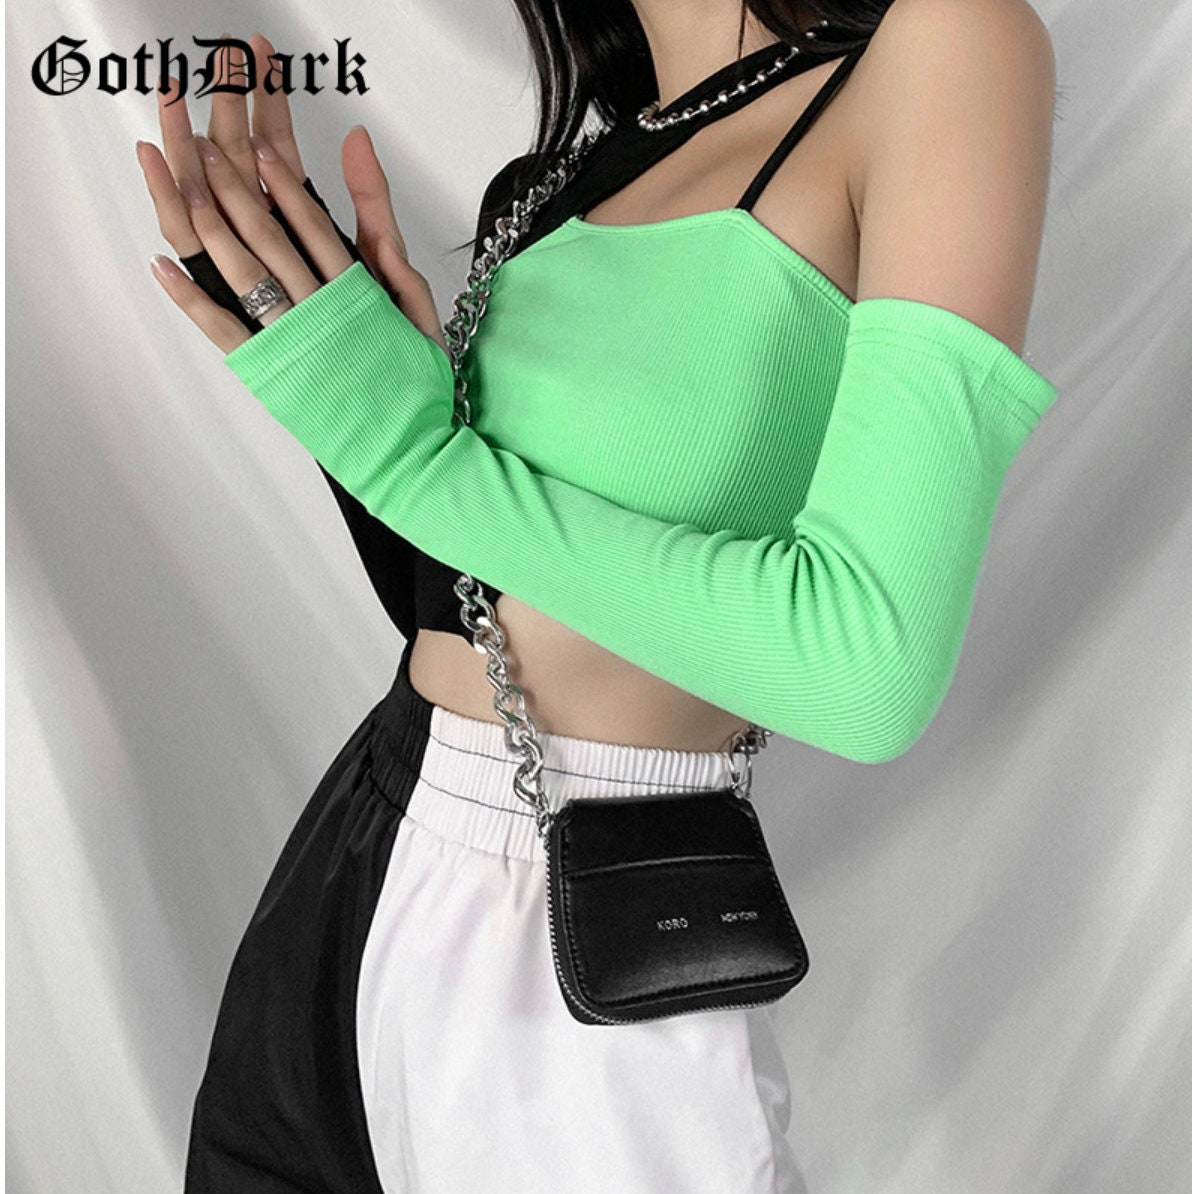 Gothic greeen balck Goth Dark Y2k Punk Patchwork E-girl Style T-shirts Gothic Color Hip Hop Hollow Out Backless Top Techwear Streetwear # 261